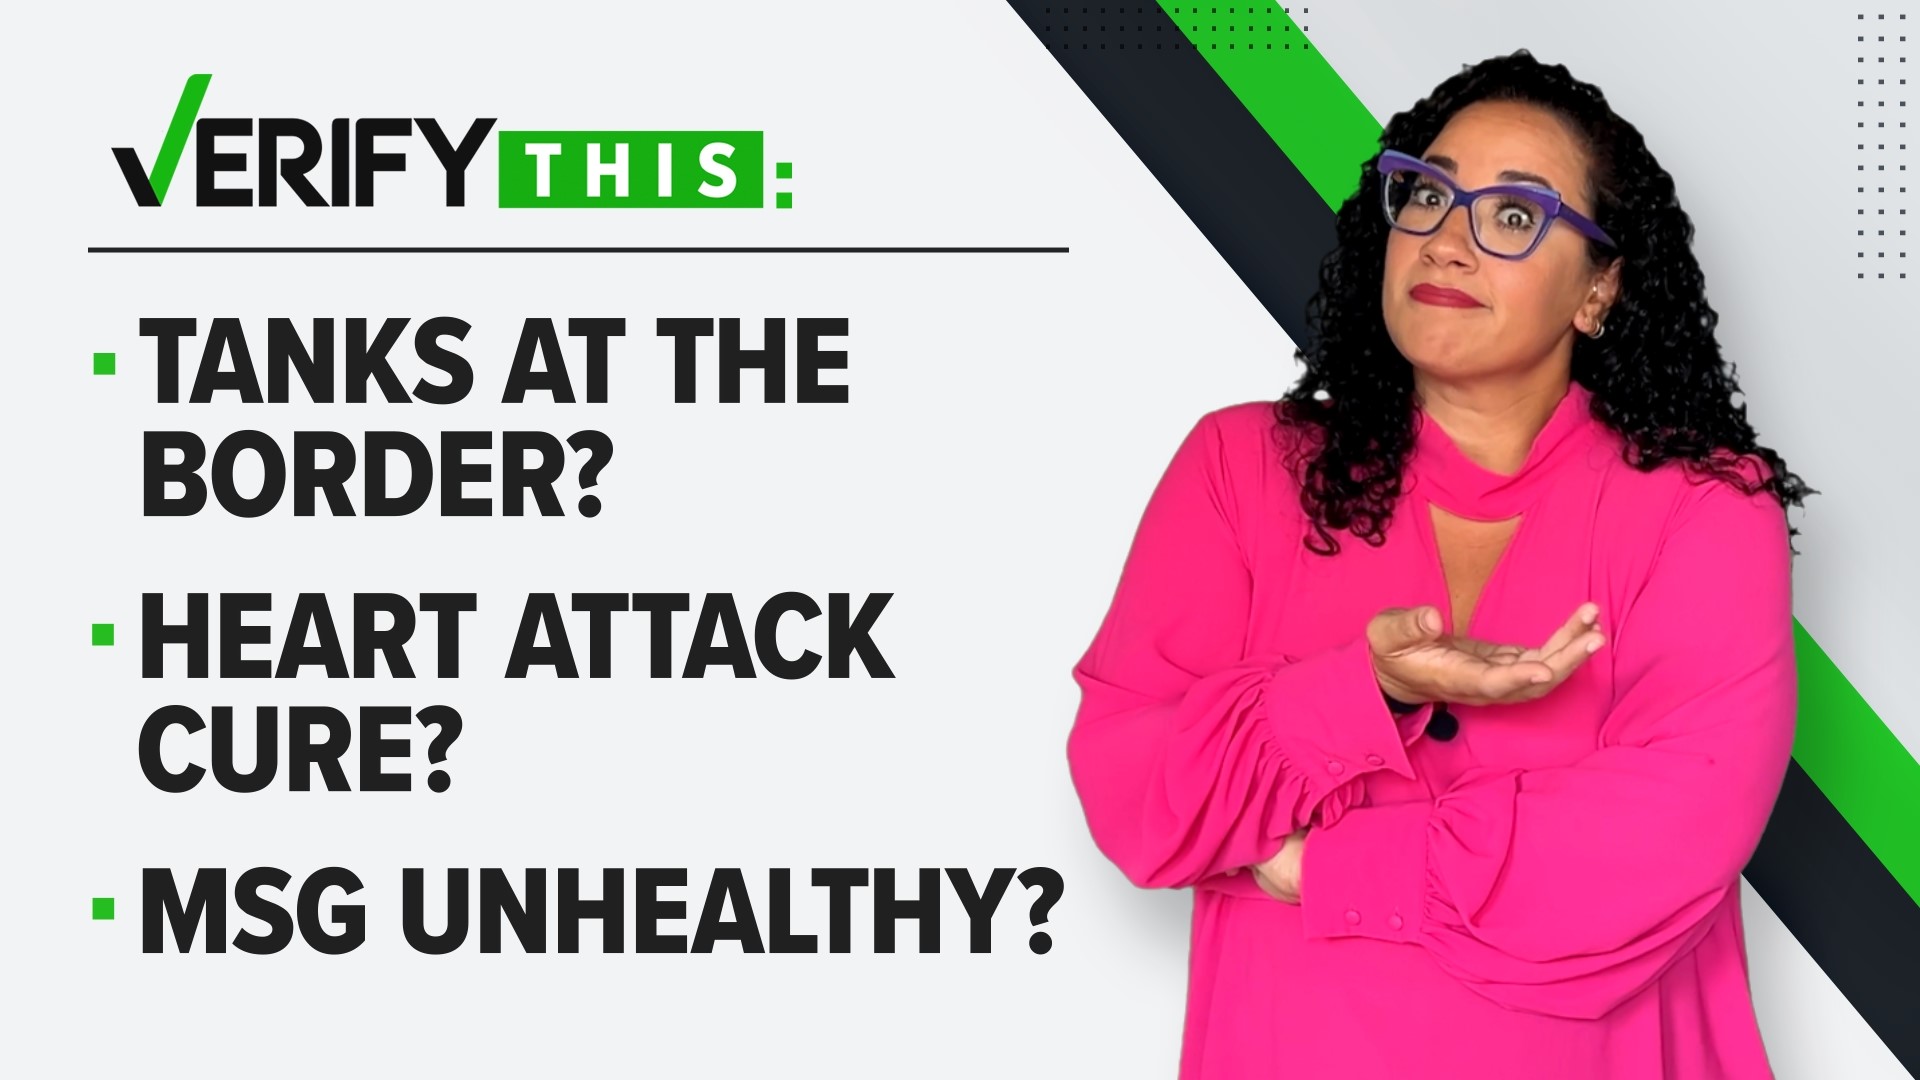 In this week's episode, we verify if a video claiming to show tanks at the border is real, if a viral elbow hack can cure heart attacks and whether MSG is unhealthy.